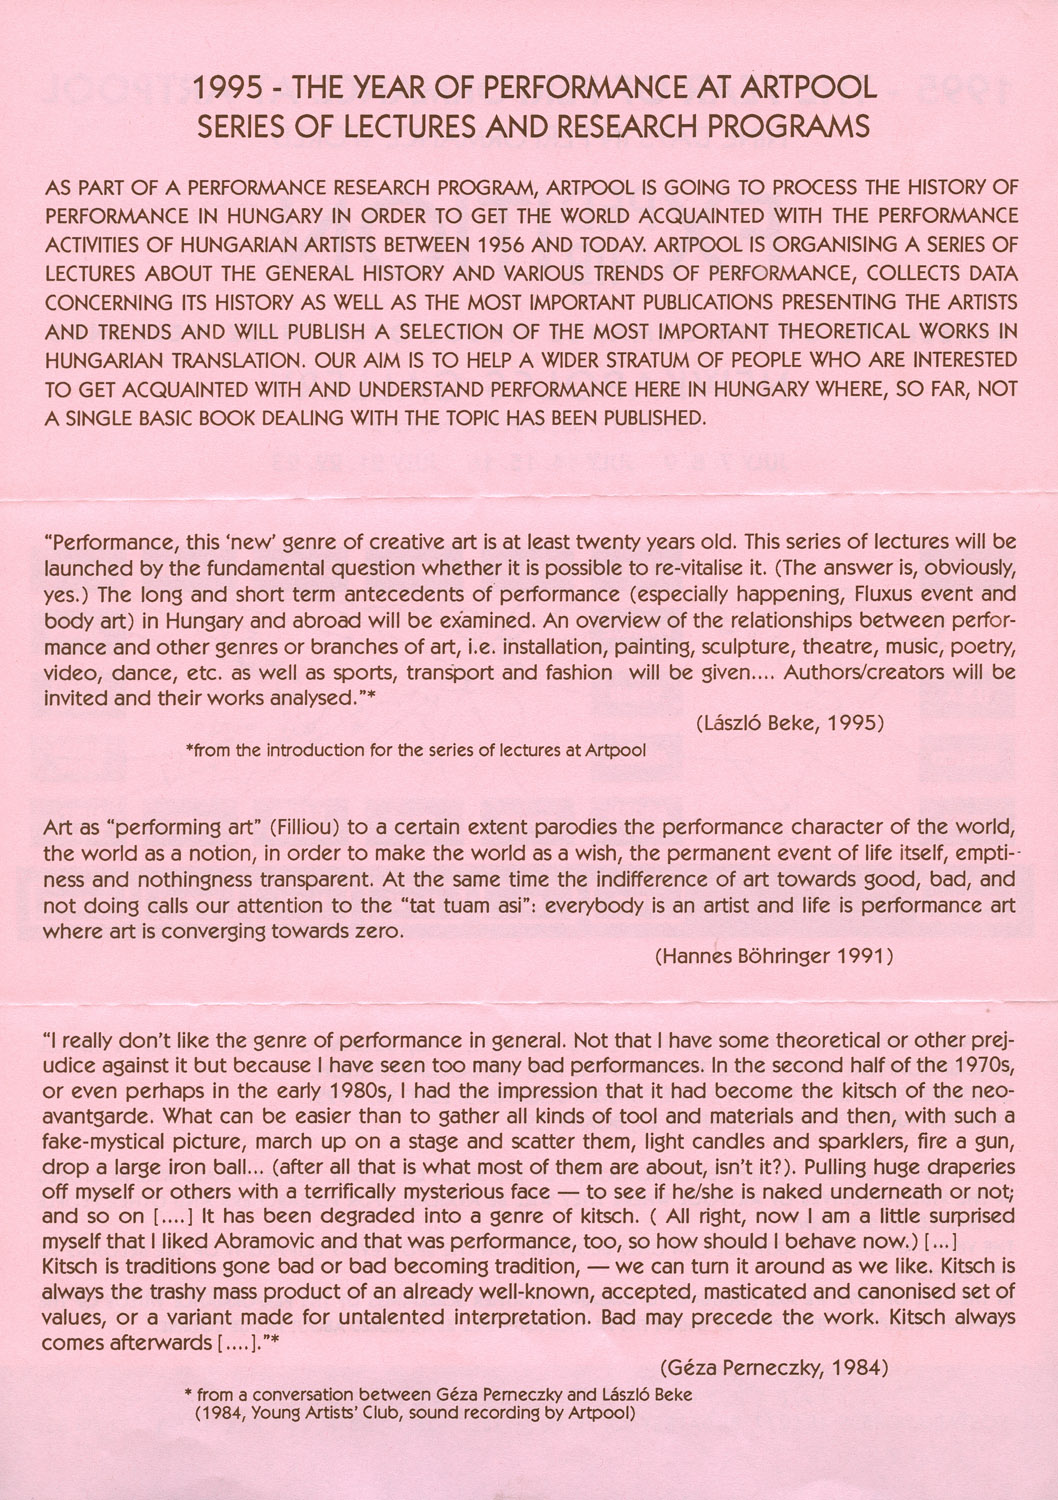 Call for participation in the screening of performance videos at NewKapolcs Gallery, Kapolcs, Summer 1995 (first and second page)